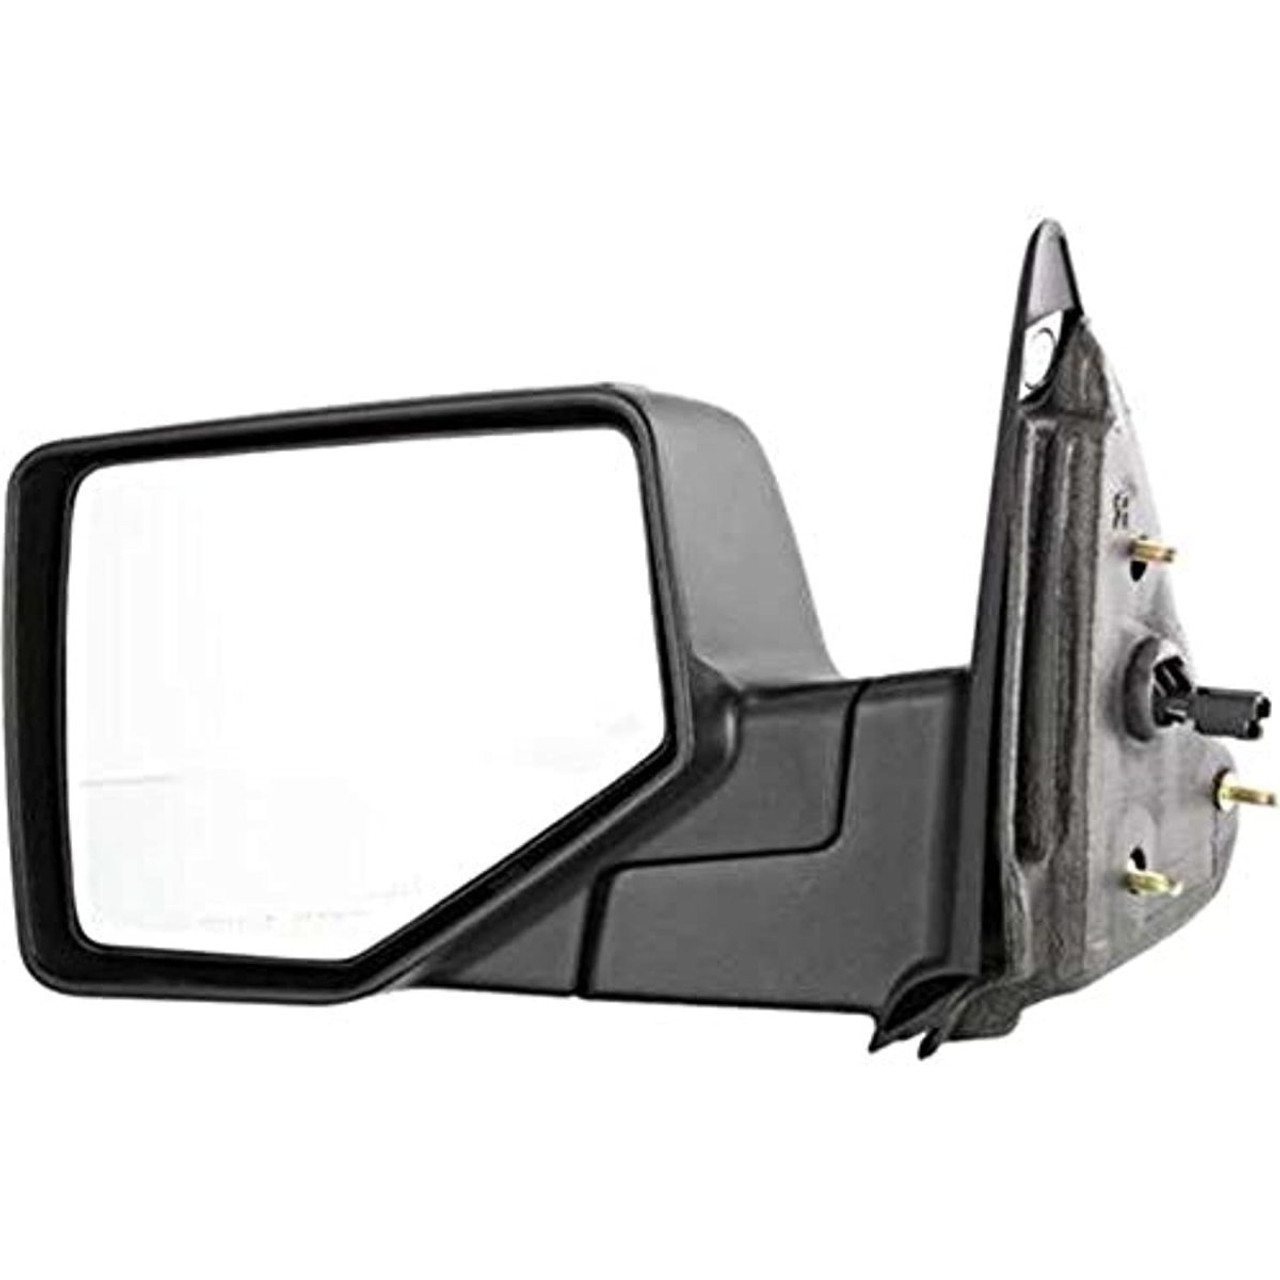 06-11 Ranger Left Driver Mirror Power Textured Base / Smooth Cover